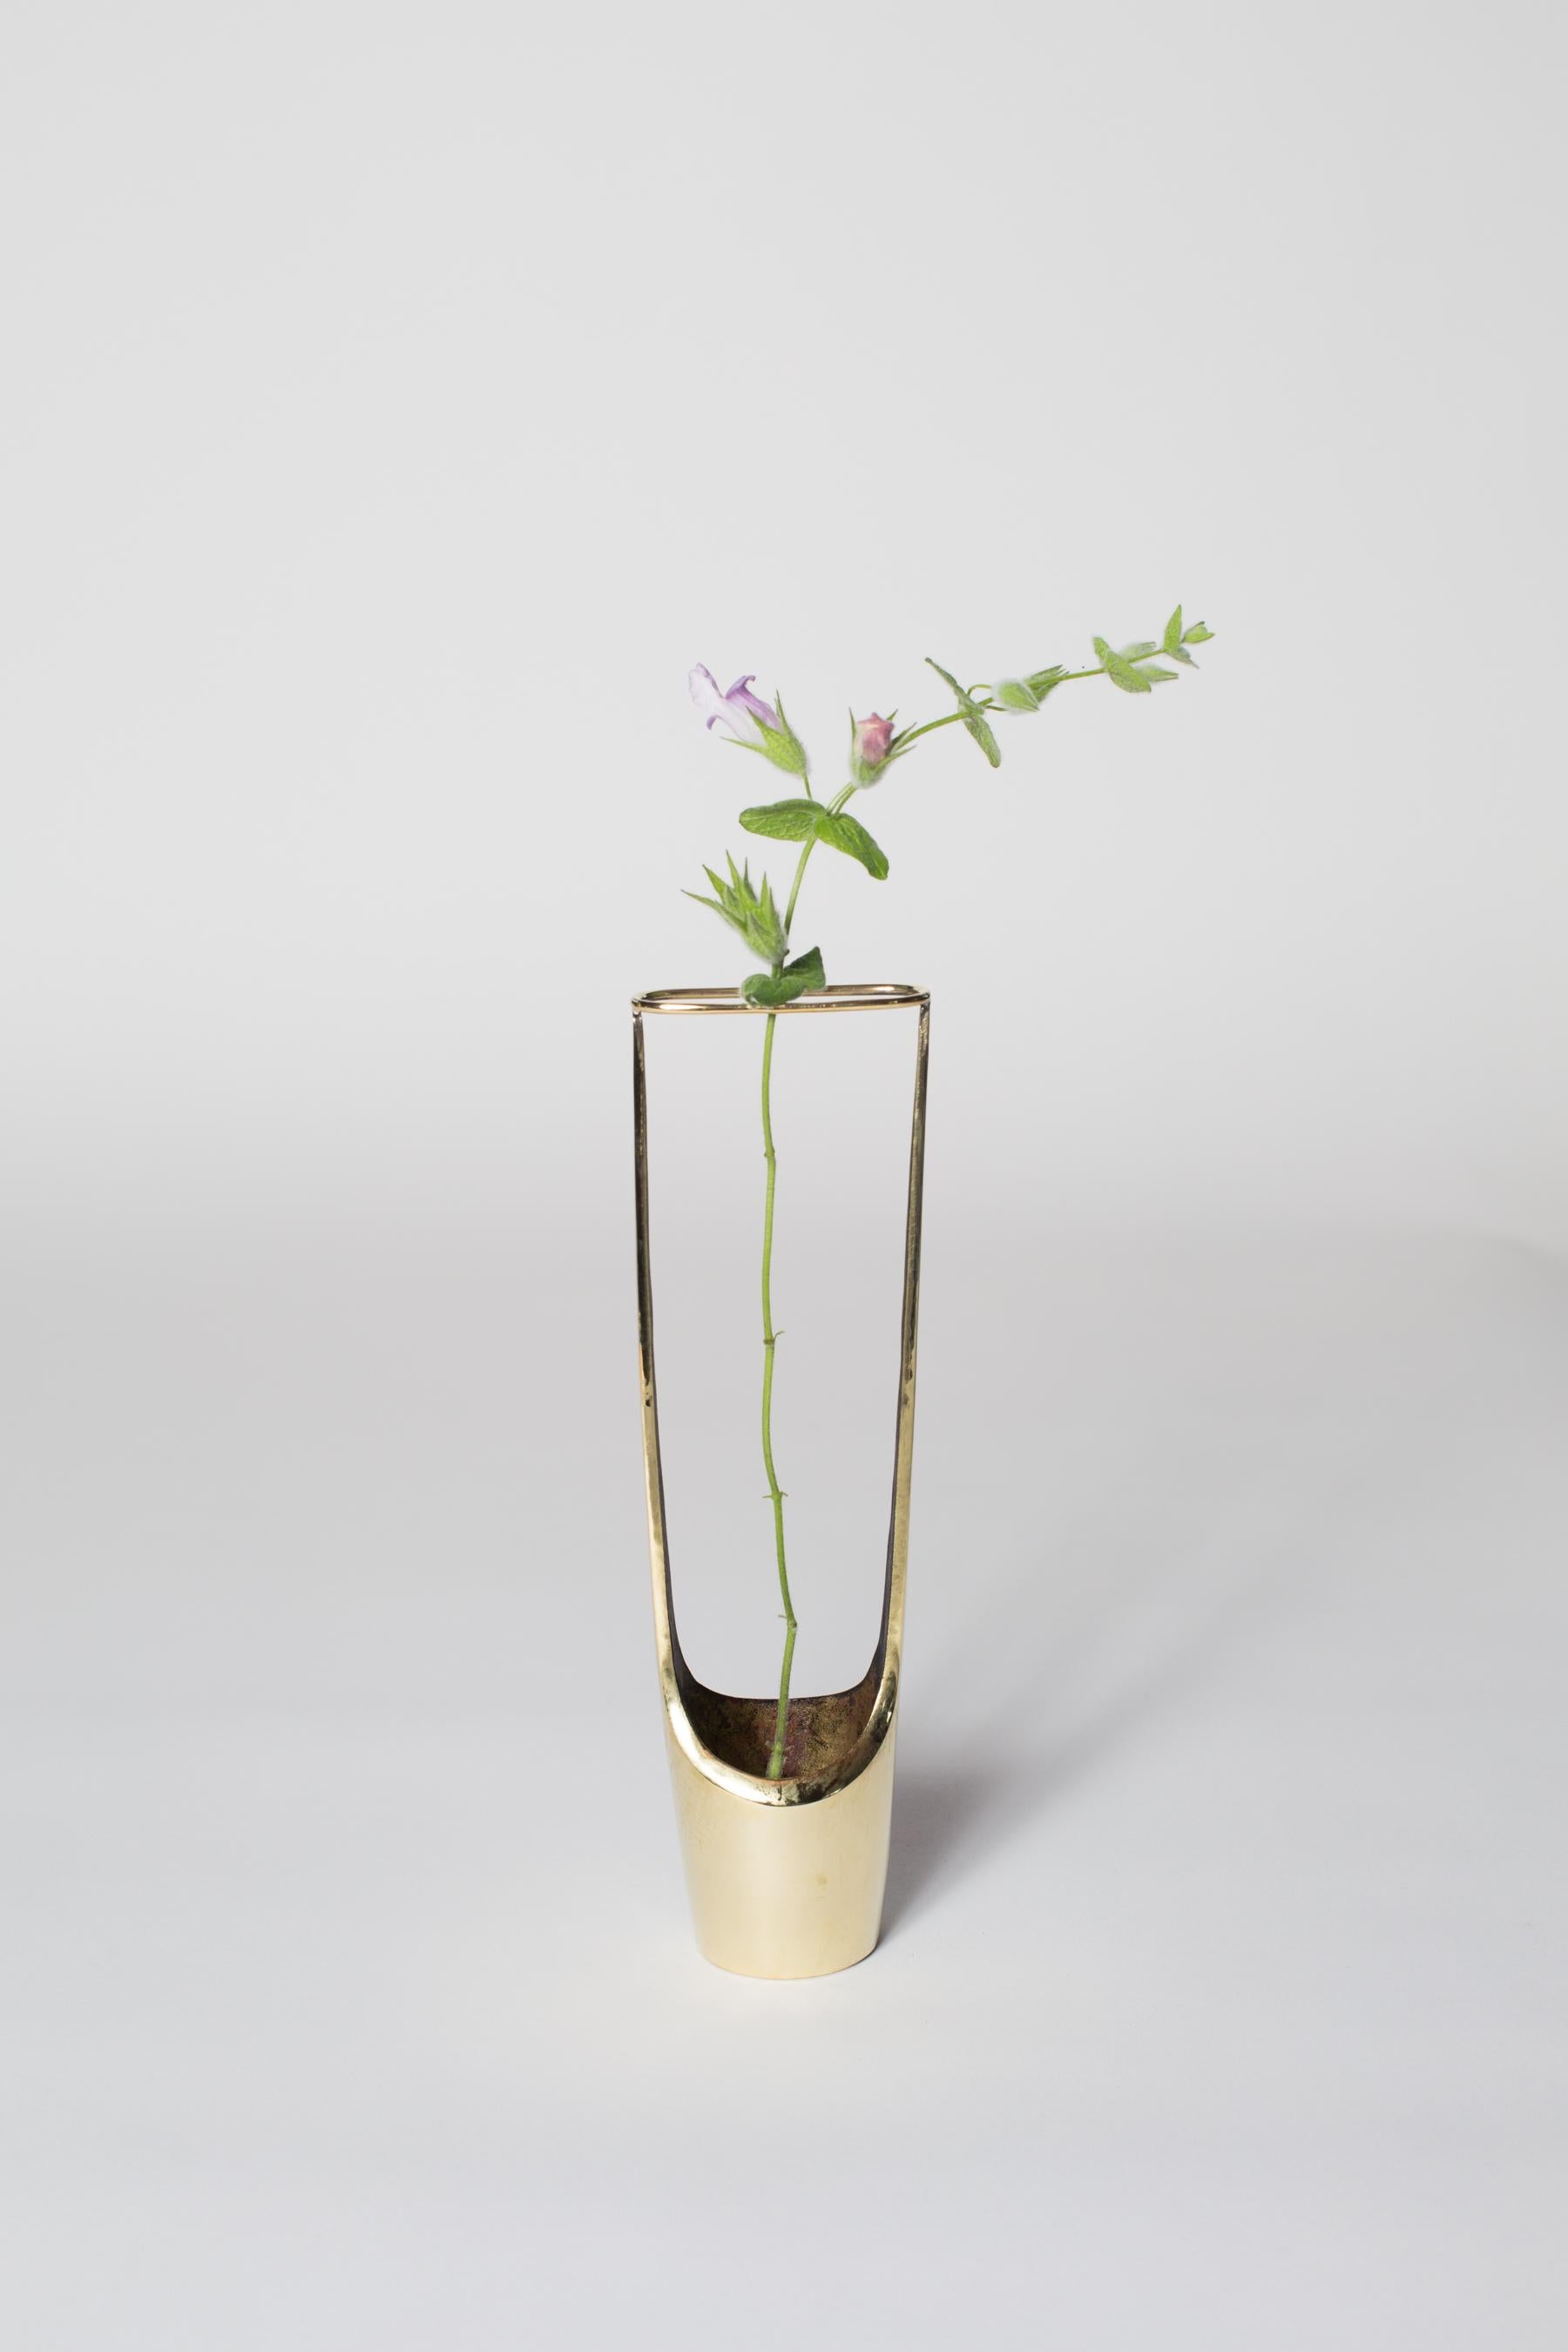 Carl Auböck model #7228 polished brass vase designed in the 1950s, this incredibly refined and sculptural Viennese vase is executed in polished and darkly patinated brass by Werkstätte Carl Auböck, Austria. Signature in brass.

Price is per item. 3